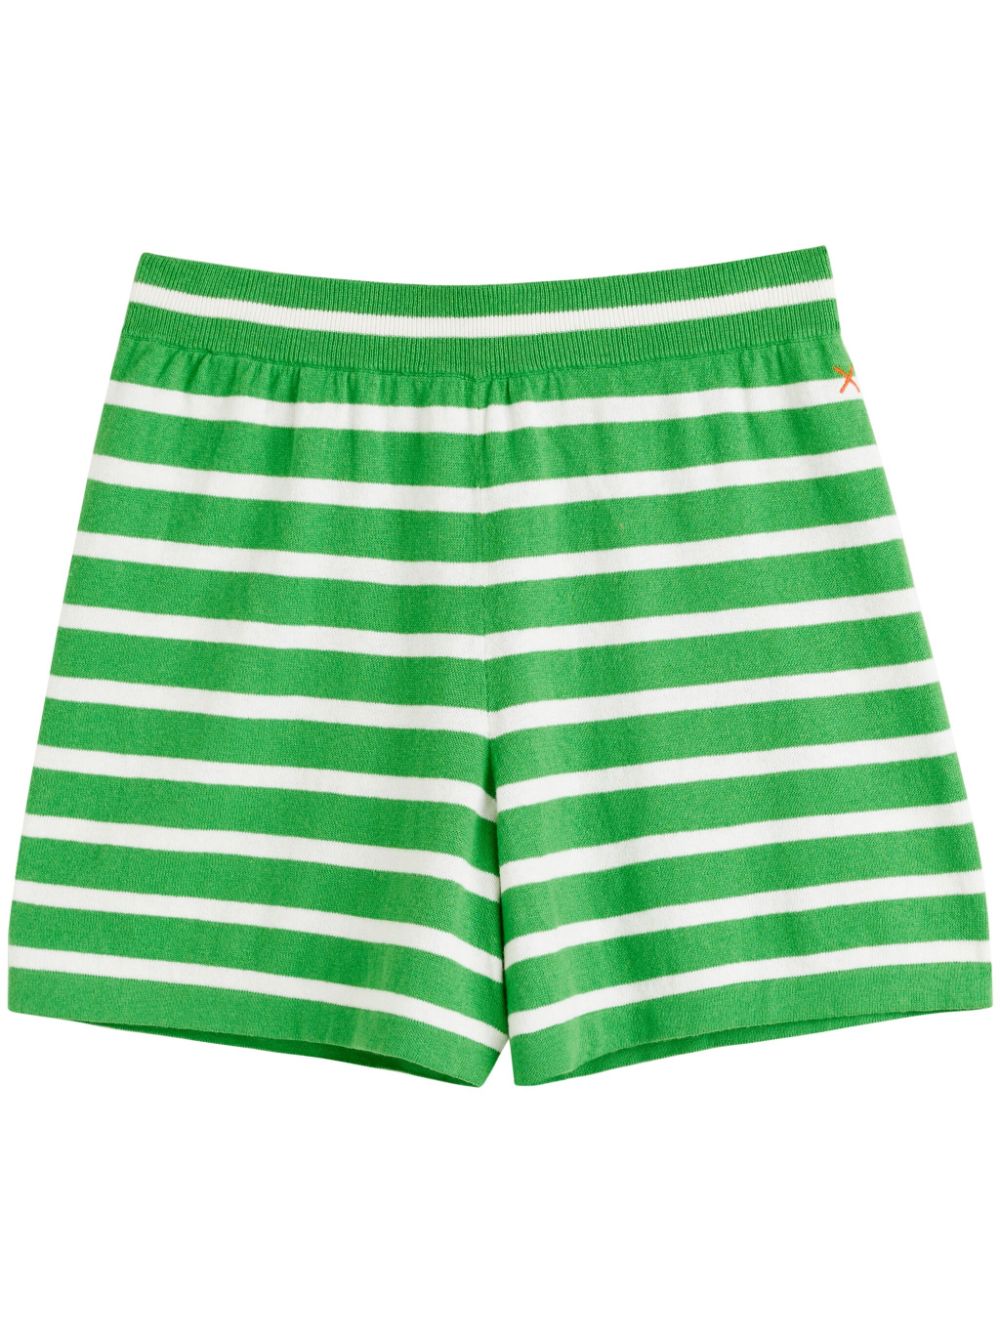 Chinti & Parker striped knitted shorts - Green von Chinti & Parker